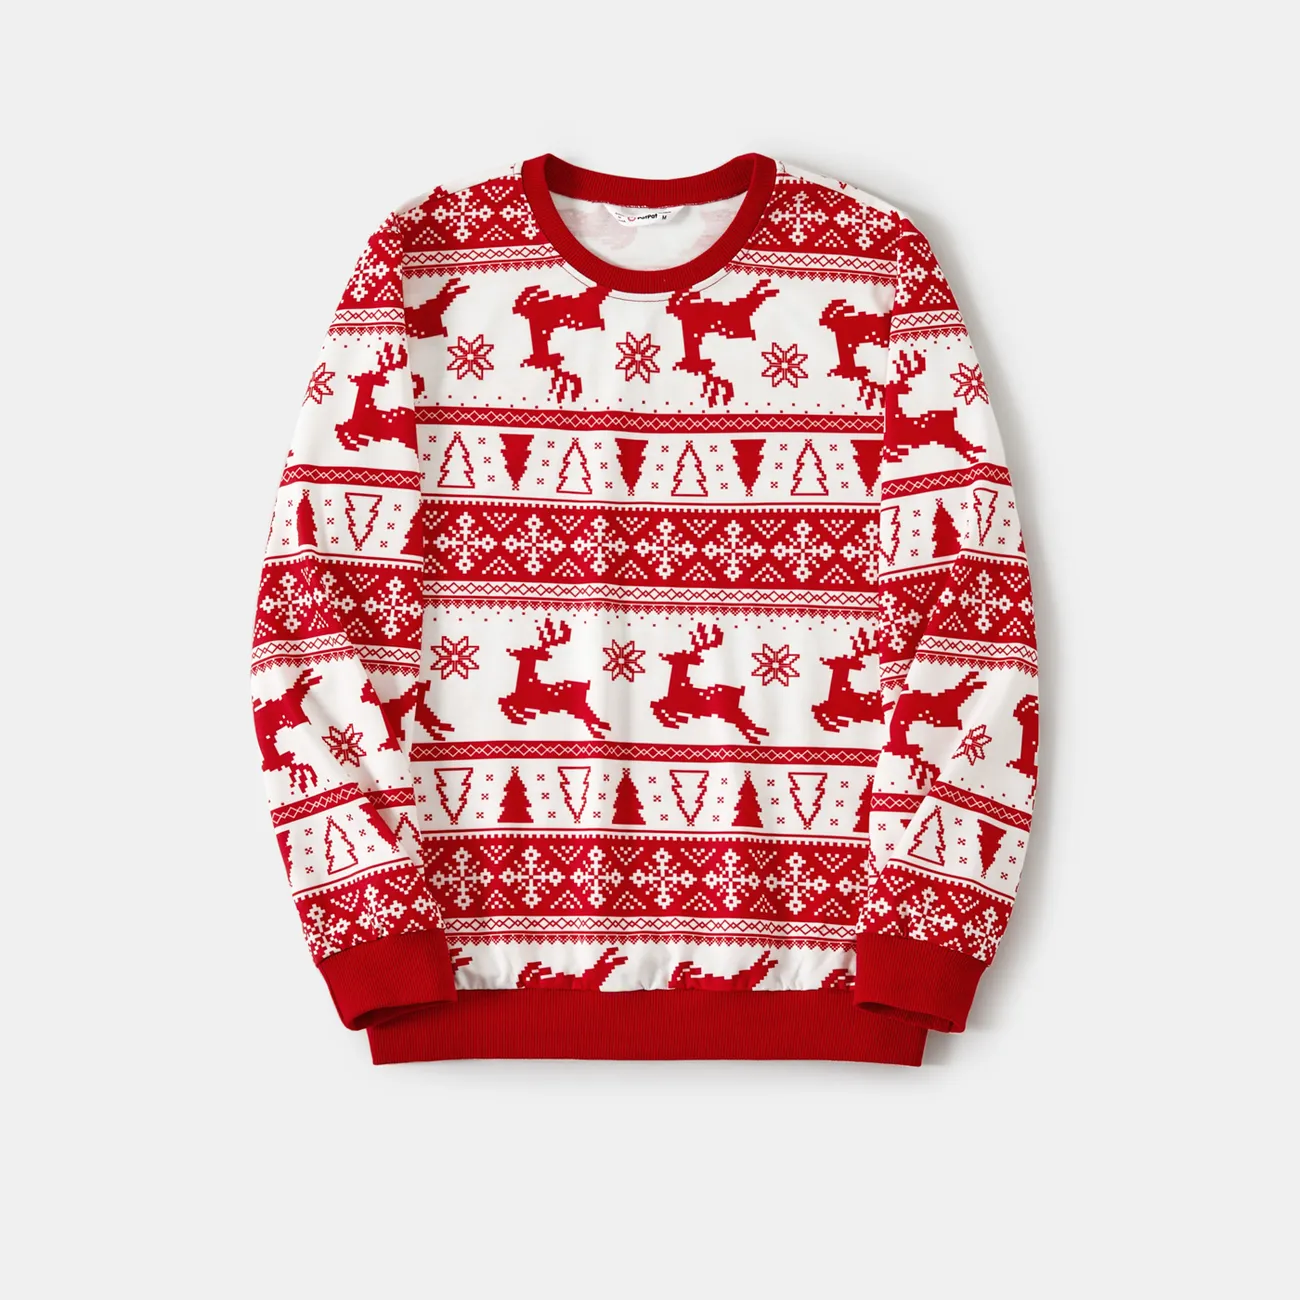 Christmas Family Matching Reindeer All-over Print Long-sleeve Tops Red big image 1